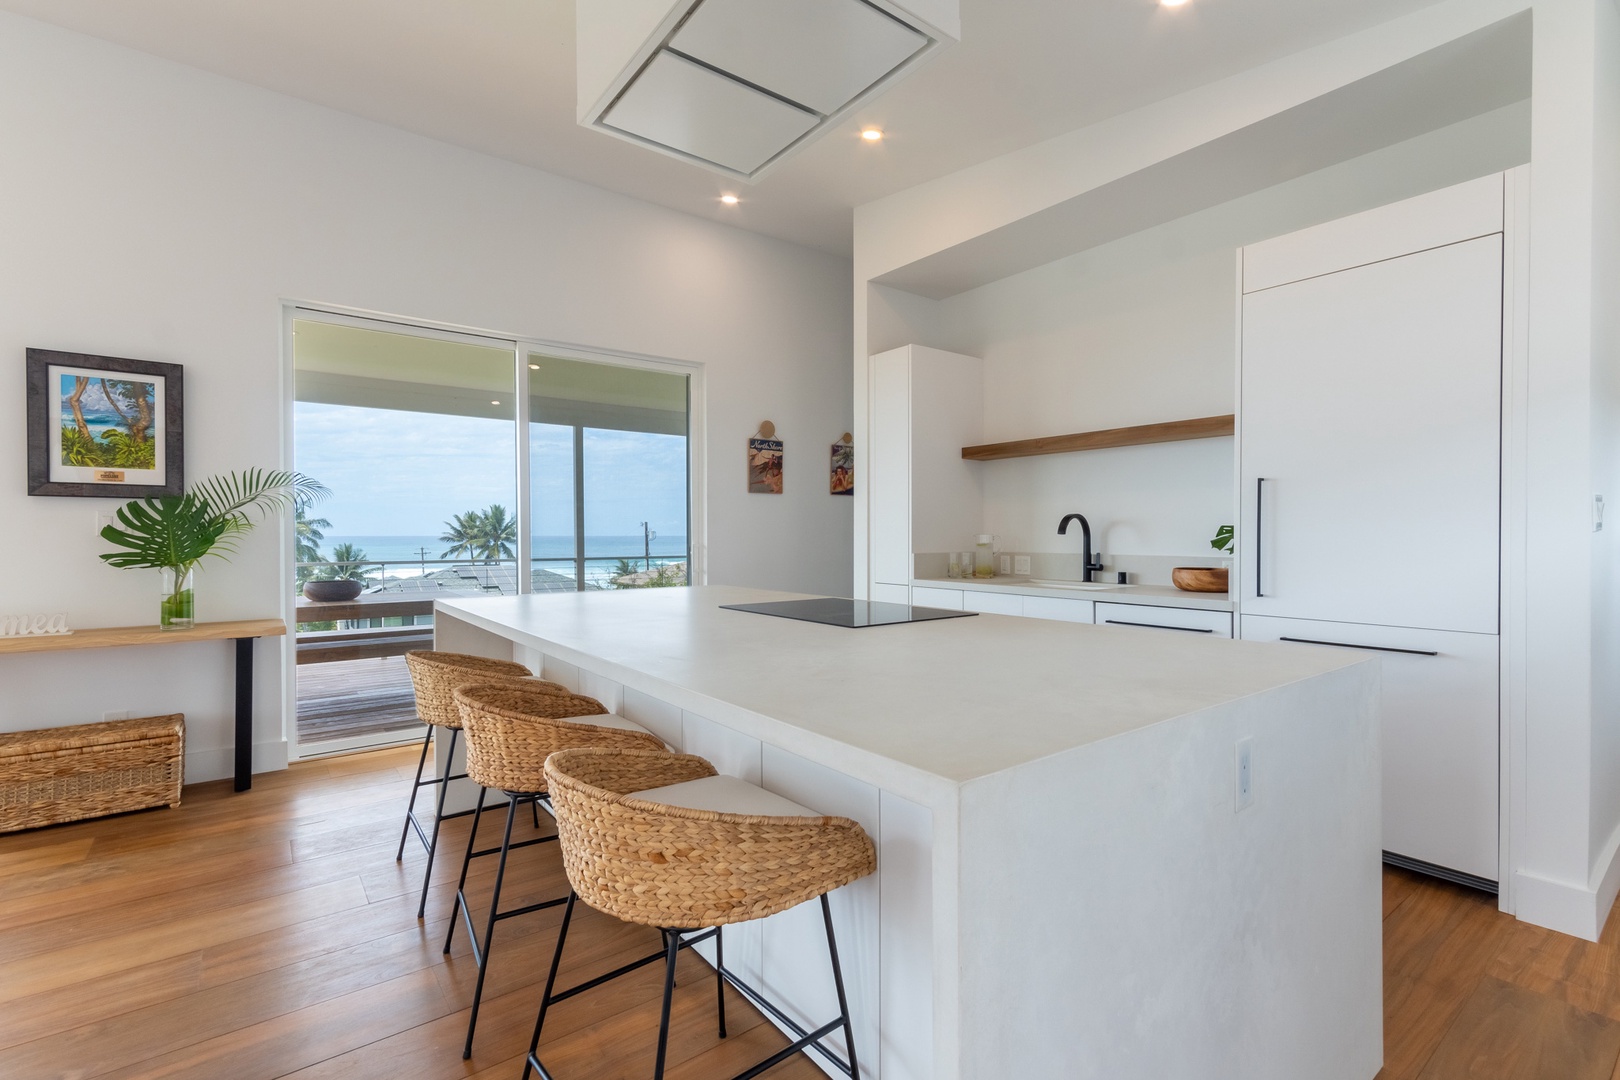 Haleiwa Vacation Rentals, Villa Bianca - Fully-stocked kitchen with island bar seating for three.